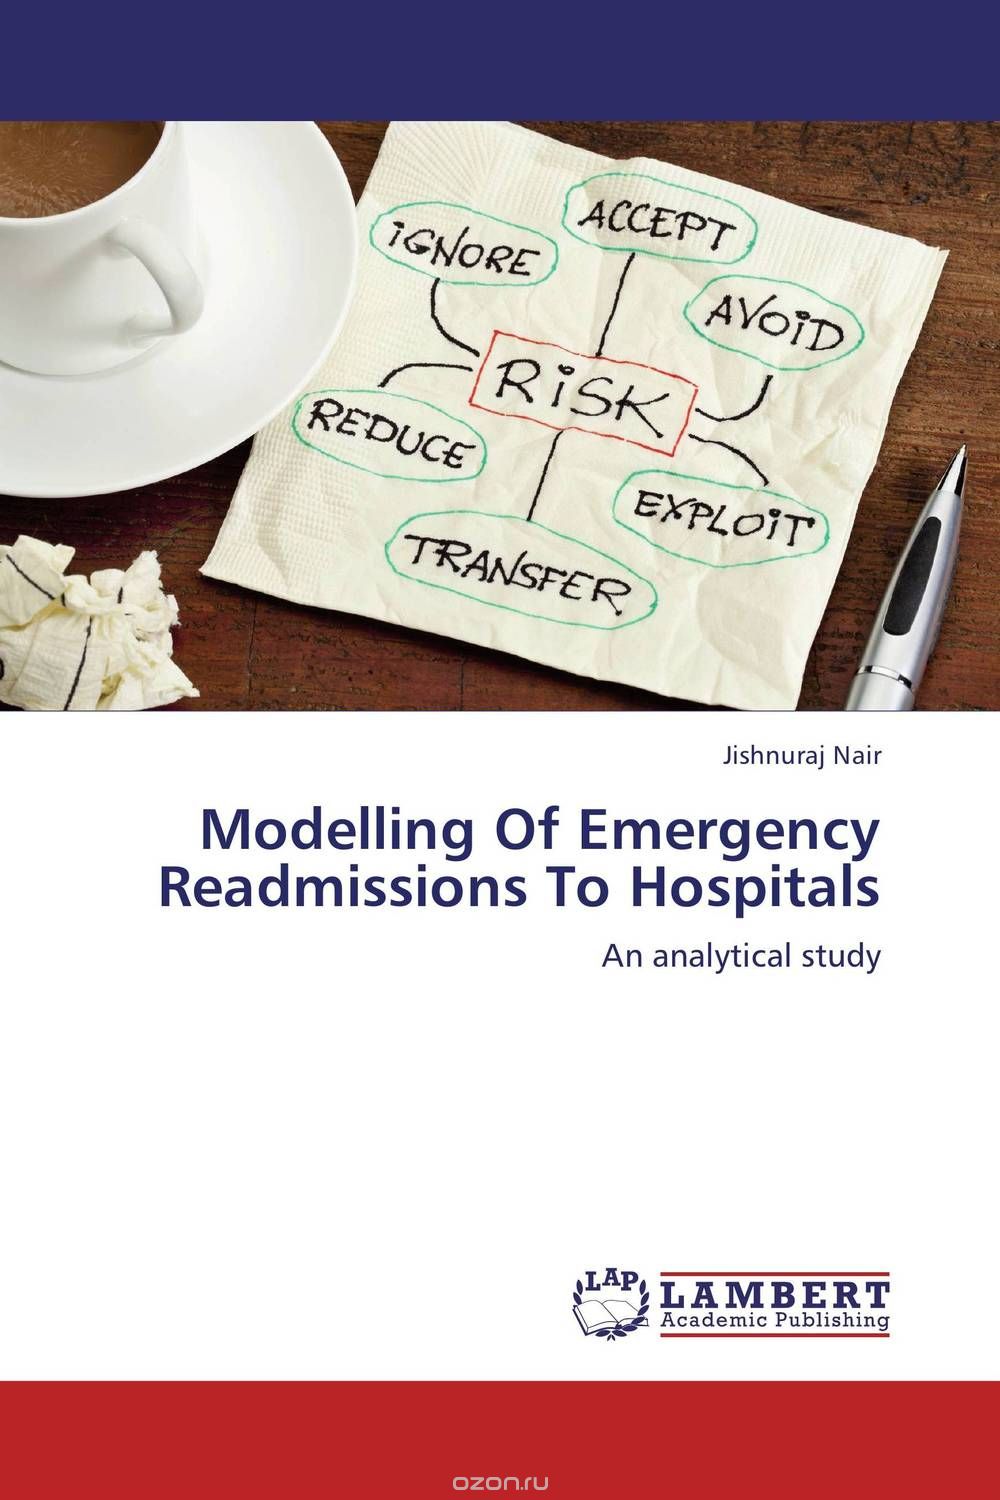 Modelling Of Emergency Readmissions To Hospitals